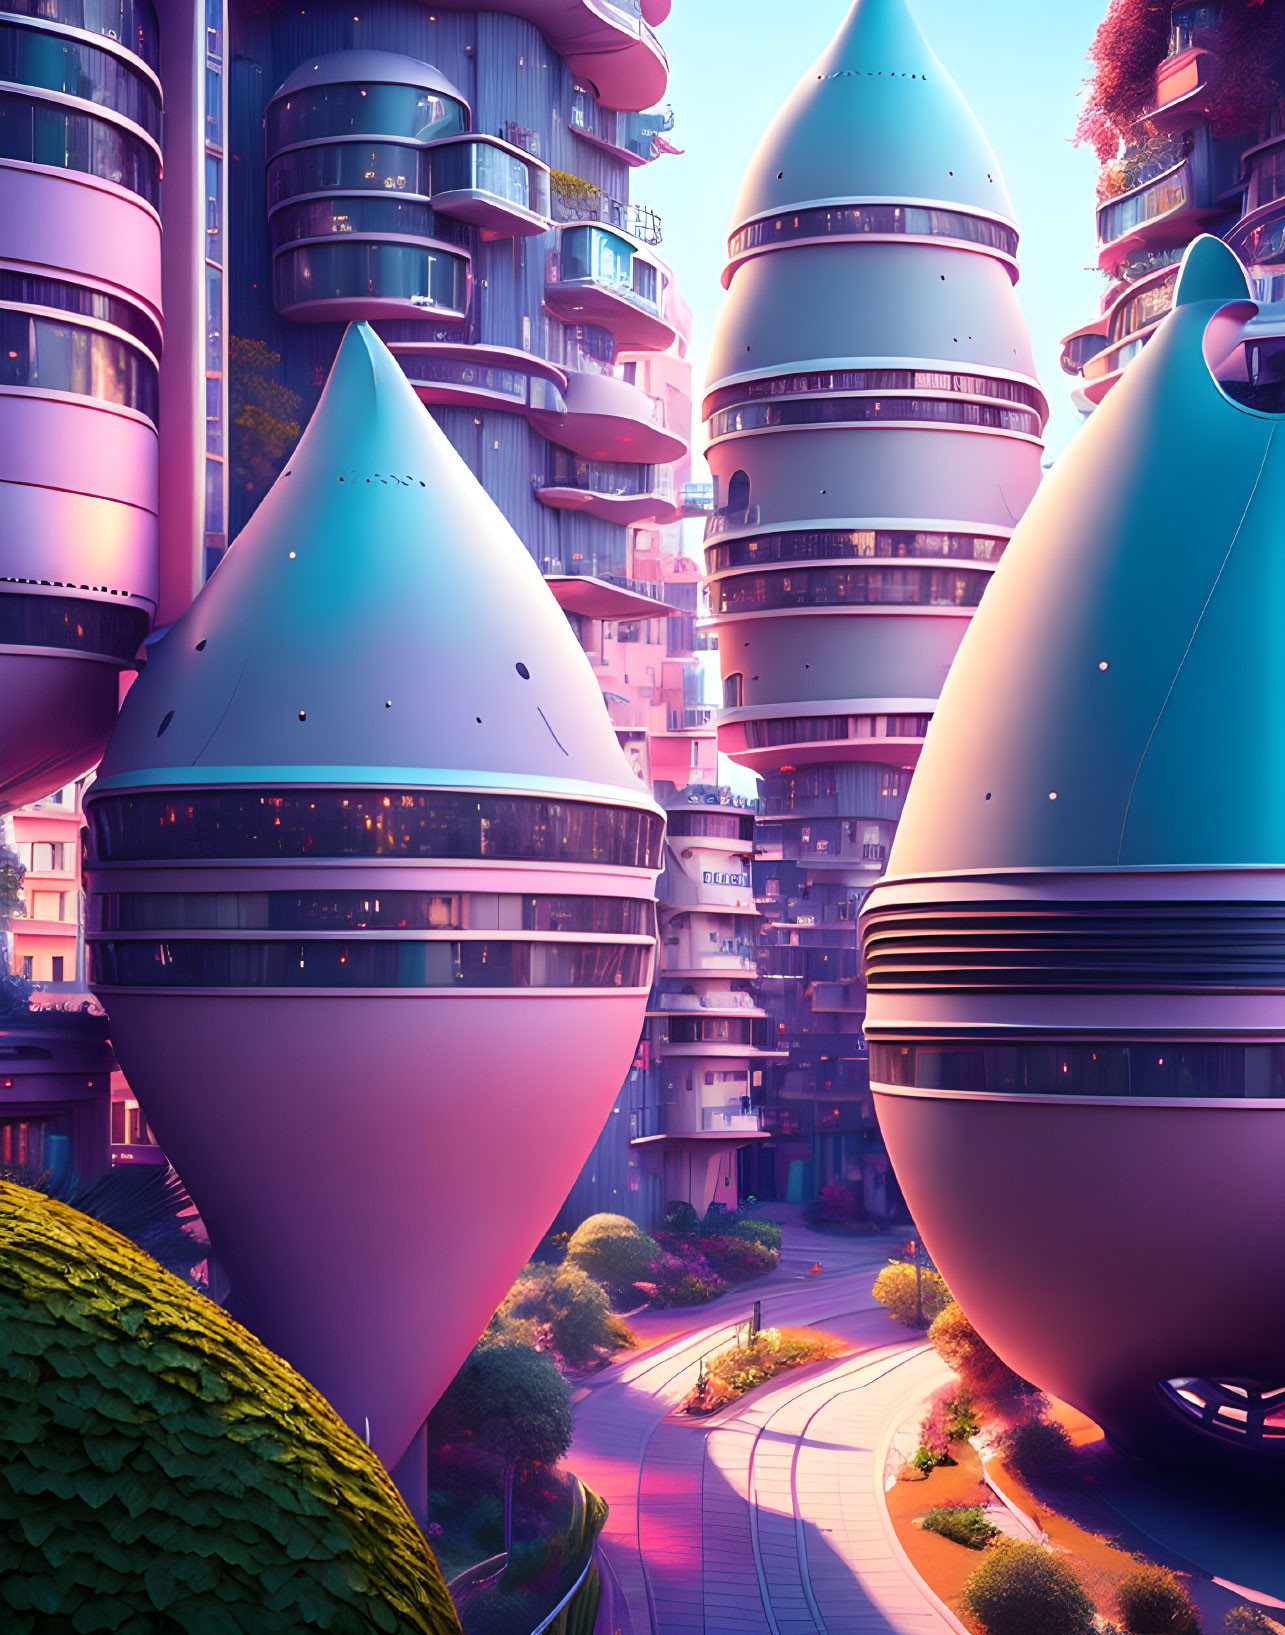 Vibrant futuristic cityscape with rounded skyscrapers and lush greenery